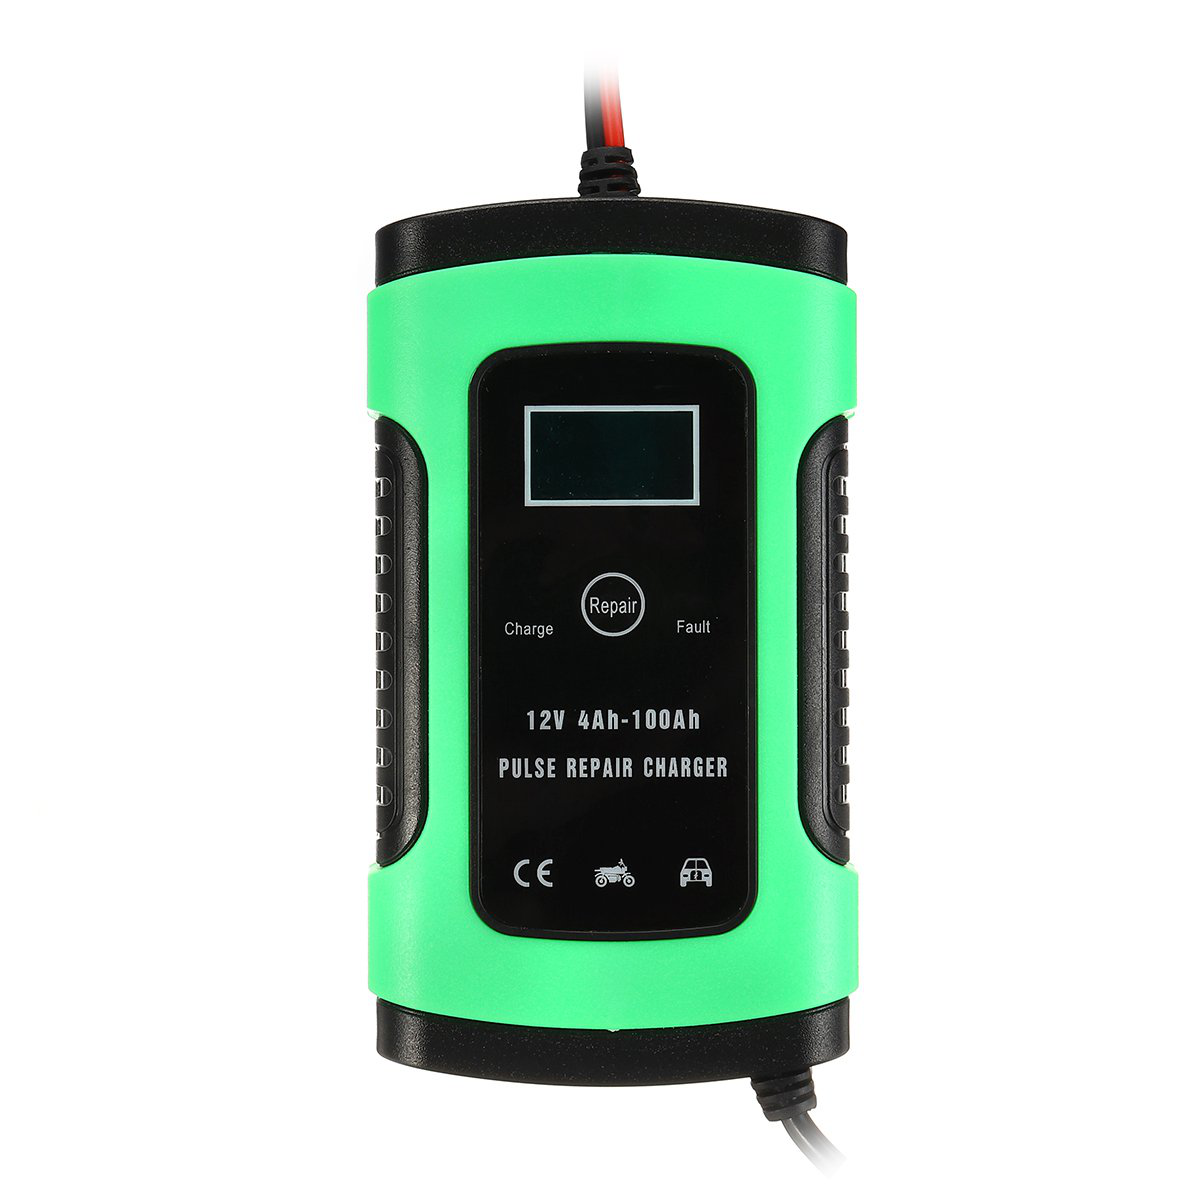 Enusic™ 12V 6A Pulse Repair LCD Battery Charger for Car Motorcycle Lead Acid Battery Agm Gel Wet